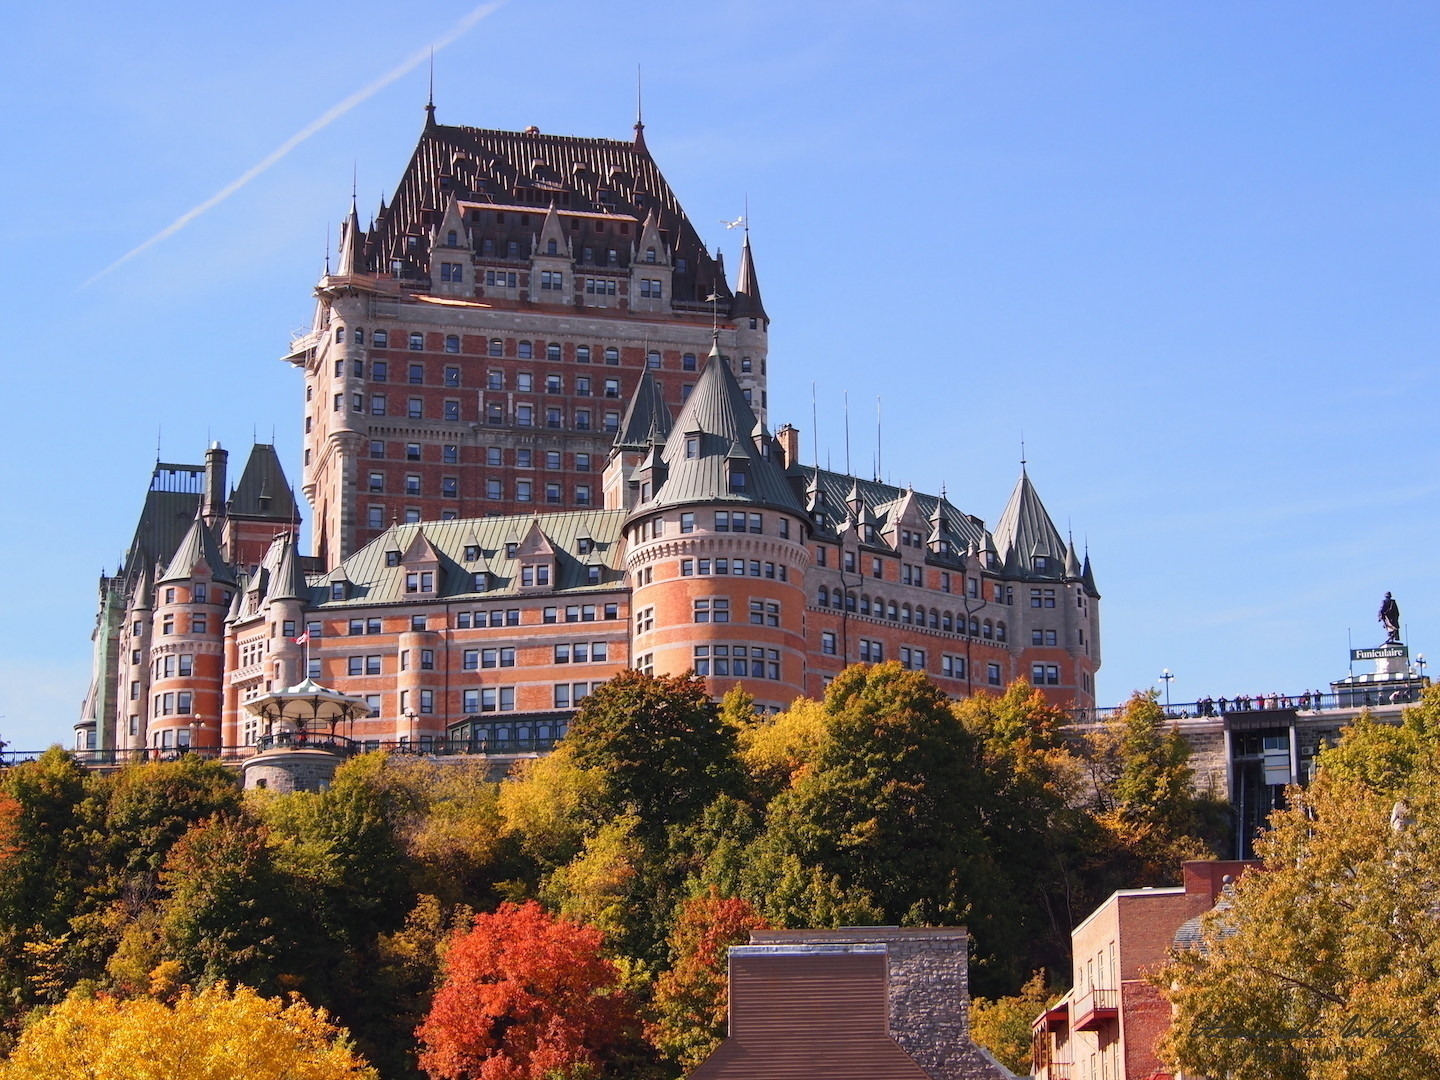 Chateau Frontenac in autumn, Quebec City